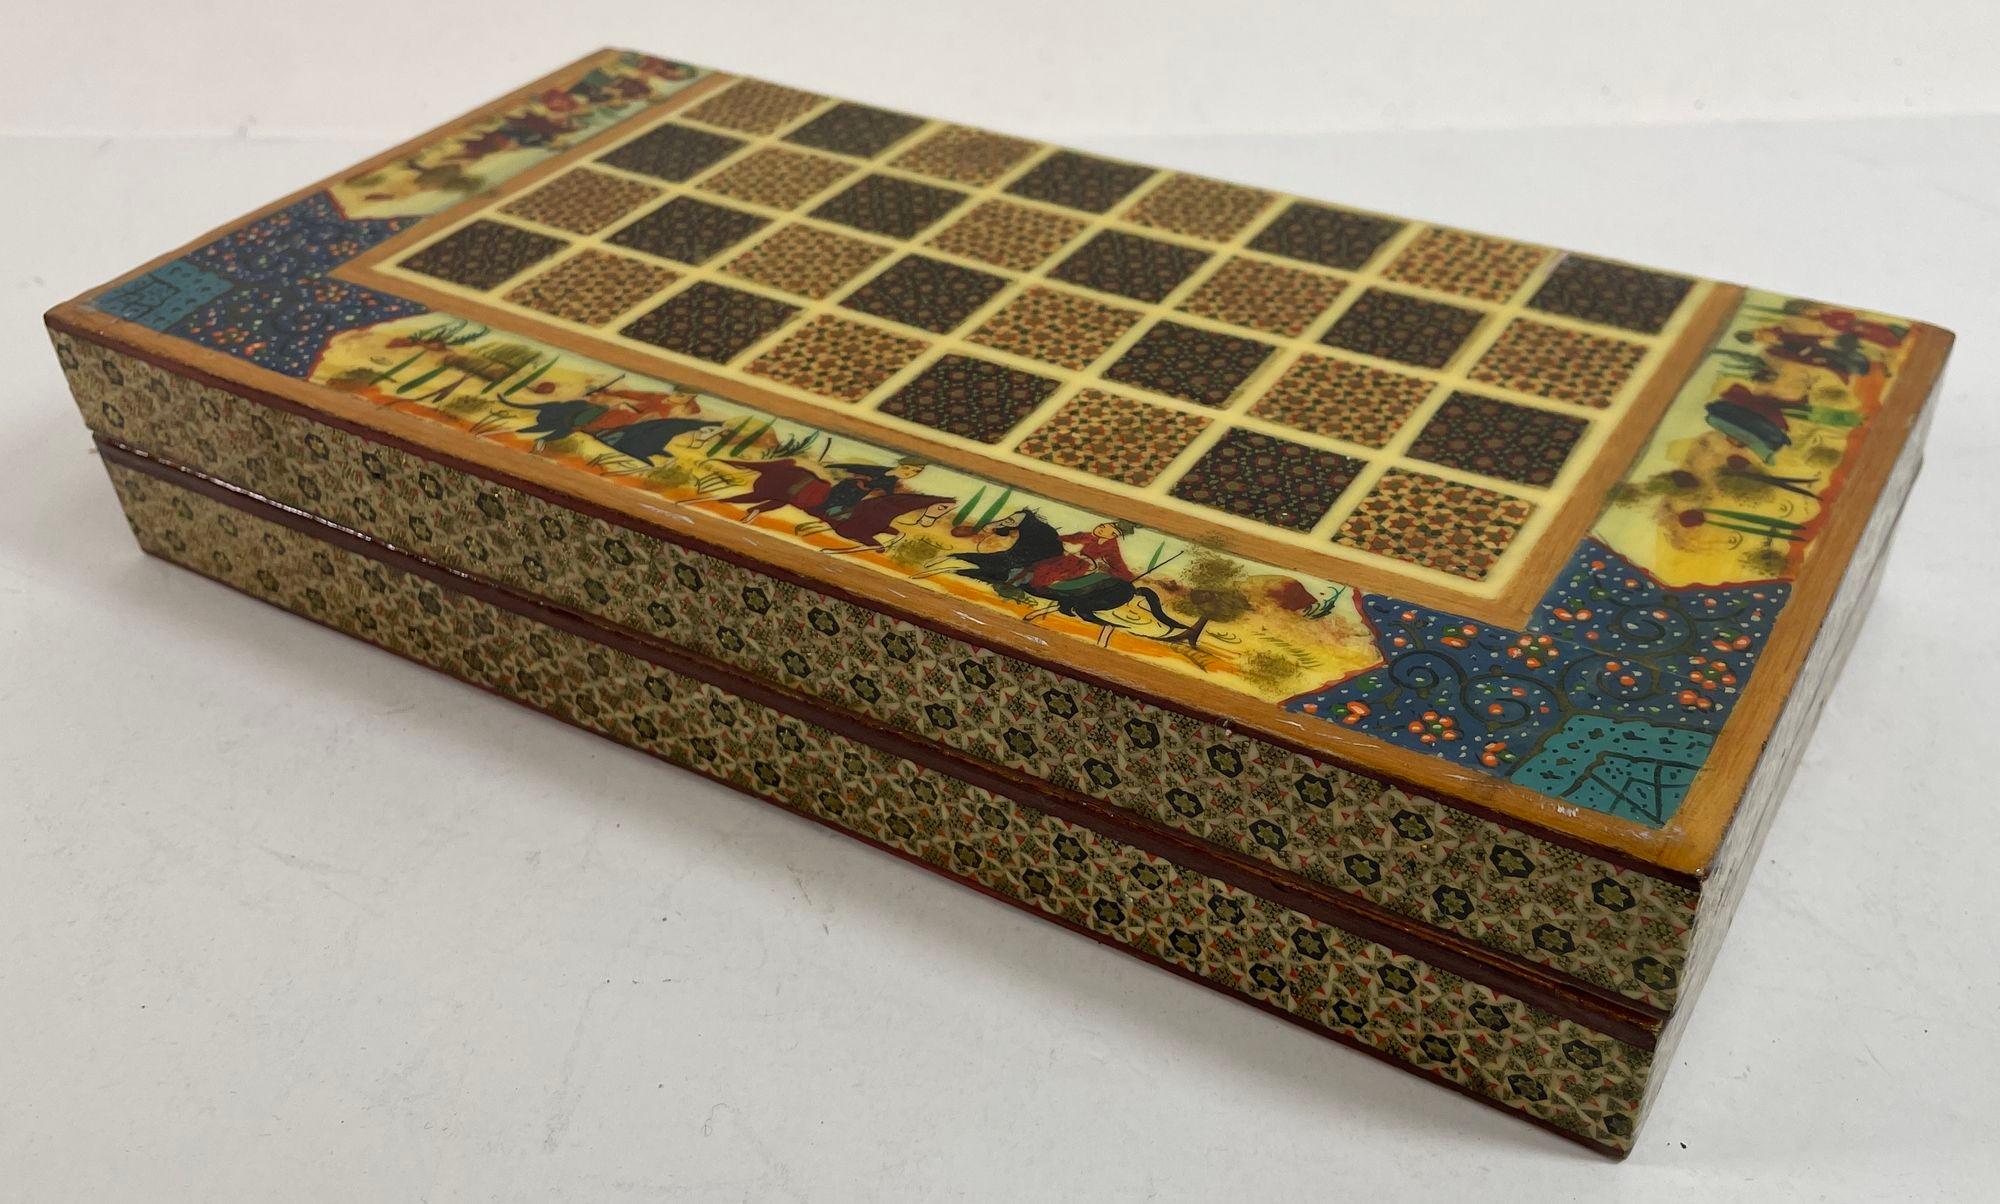 Vintage Persian Micro Mosaic Chess Game Box.
Intricately inlaid handcrafted Persian styled chess game board box.
Handcrafted beautiful Middle Eastern Moorish style Khatam chess board covered with very delicate micro mosaic marquetry from the ancient